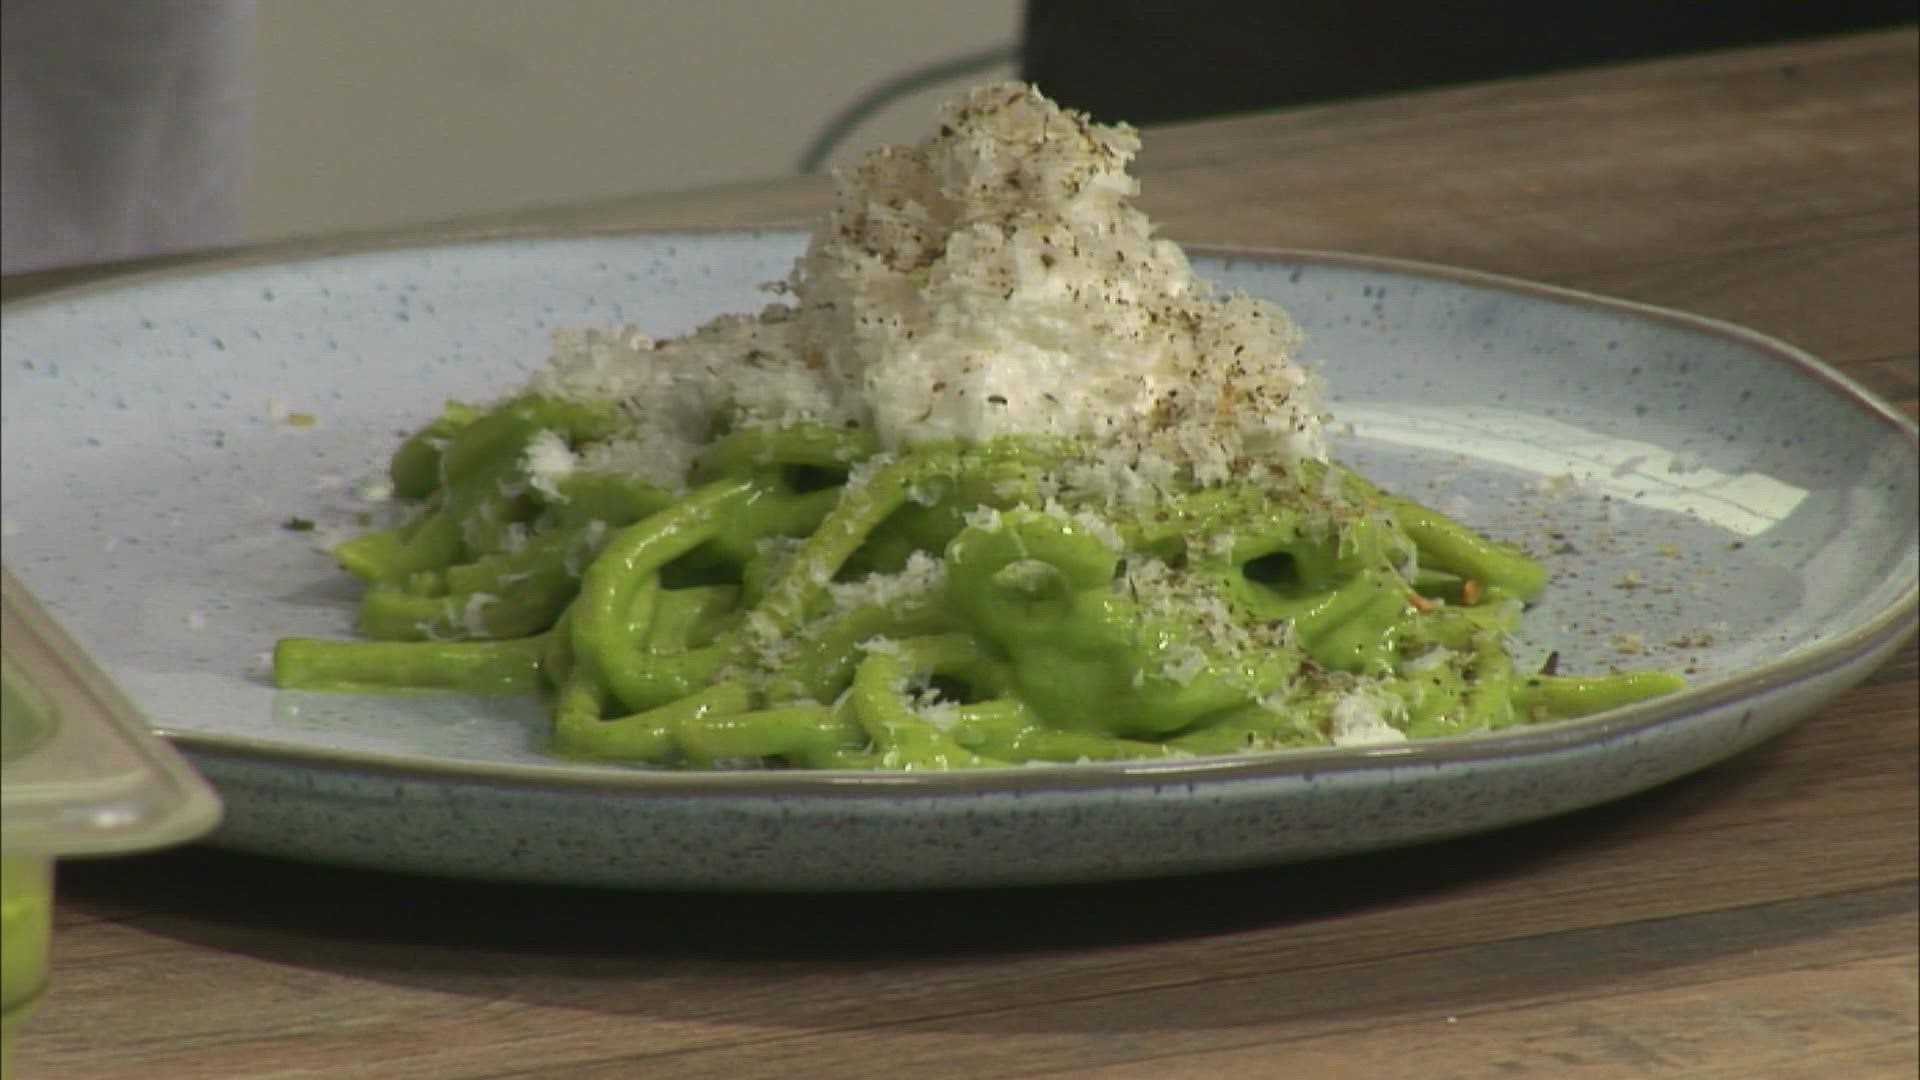 Chef Daron Goldstein from Provender Kitchen + Bar in Ellsworth is back in the 207 Kitchen, showing us how to turn pistachios into a creamy pasta sauce.